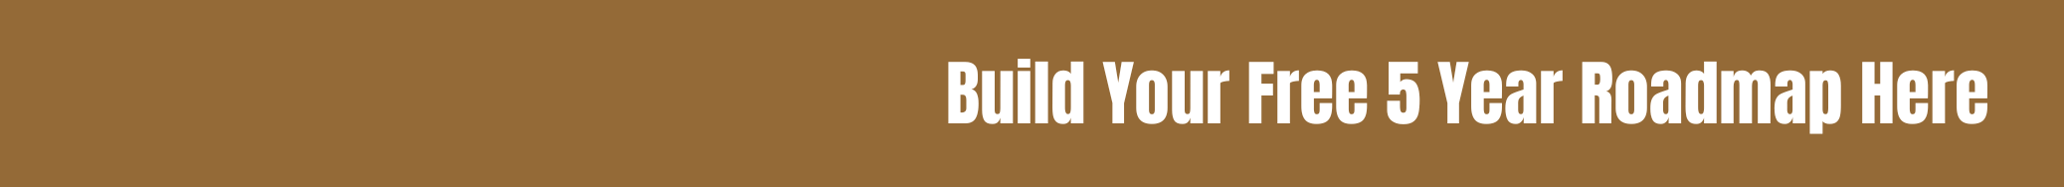 ScalingUp Banner - Build Your Free 5 Year Roadmap Here (Brown)